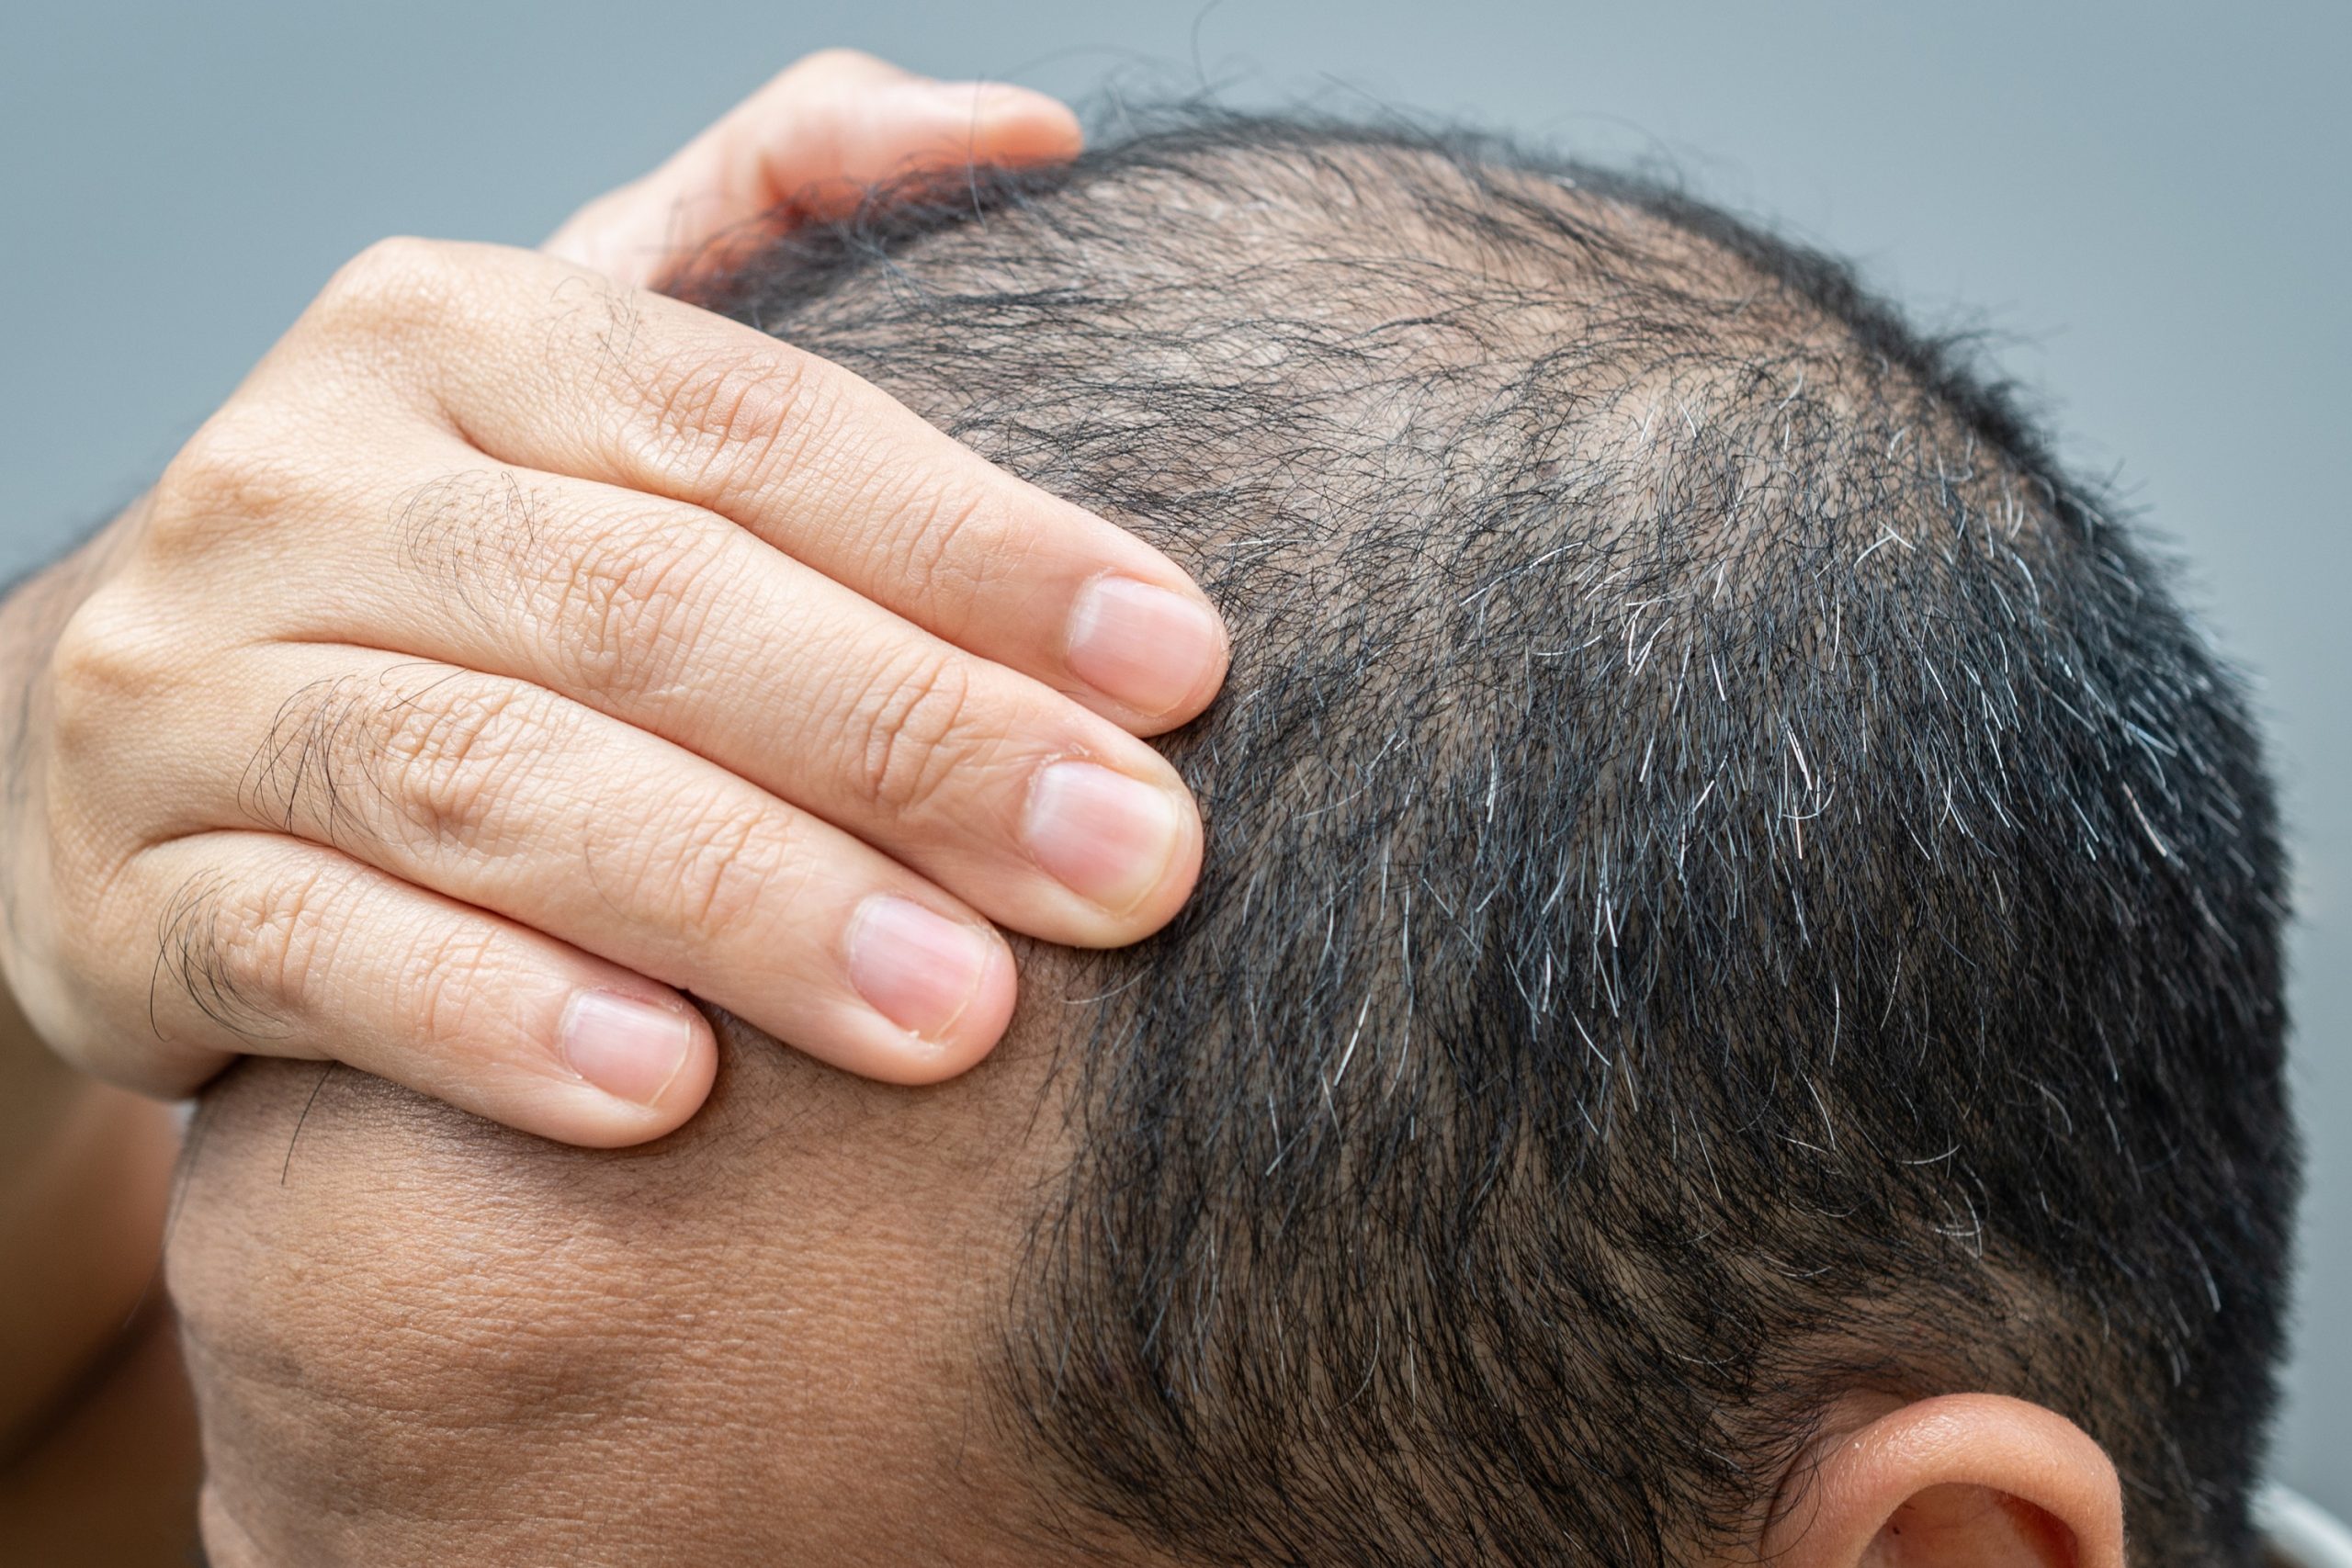 Baldness is usually most noticeable on the scalp, but it can happen anywhere on the body where hair grows.